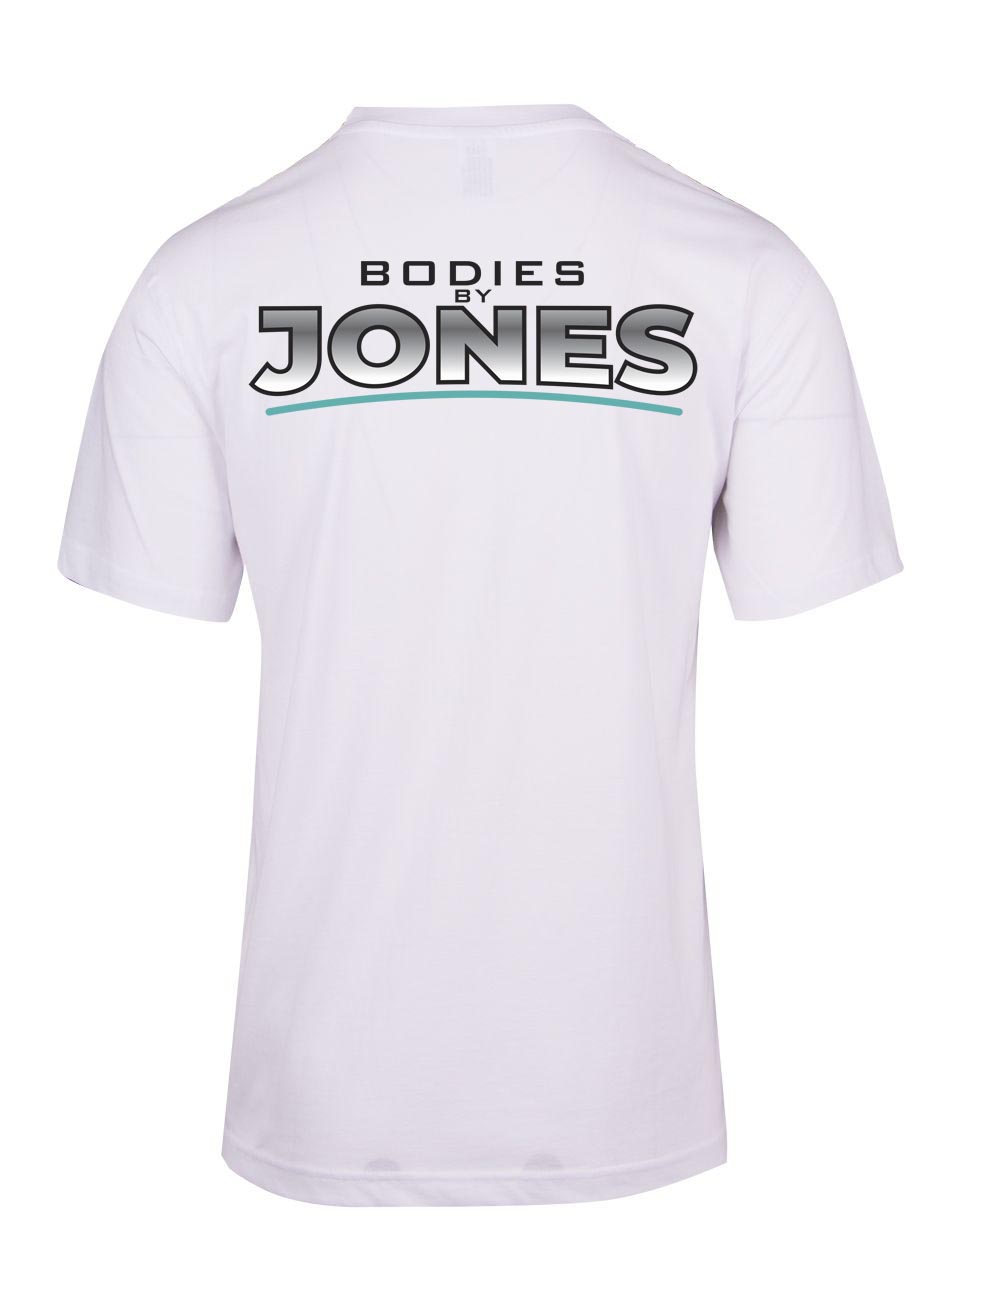 Bodies By Jones Double Sided Logo T-shirt - Ladies